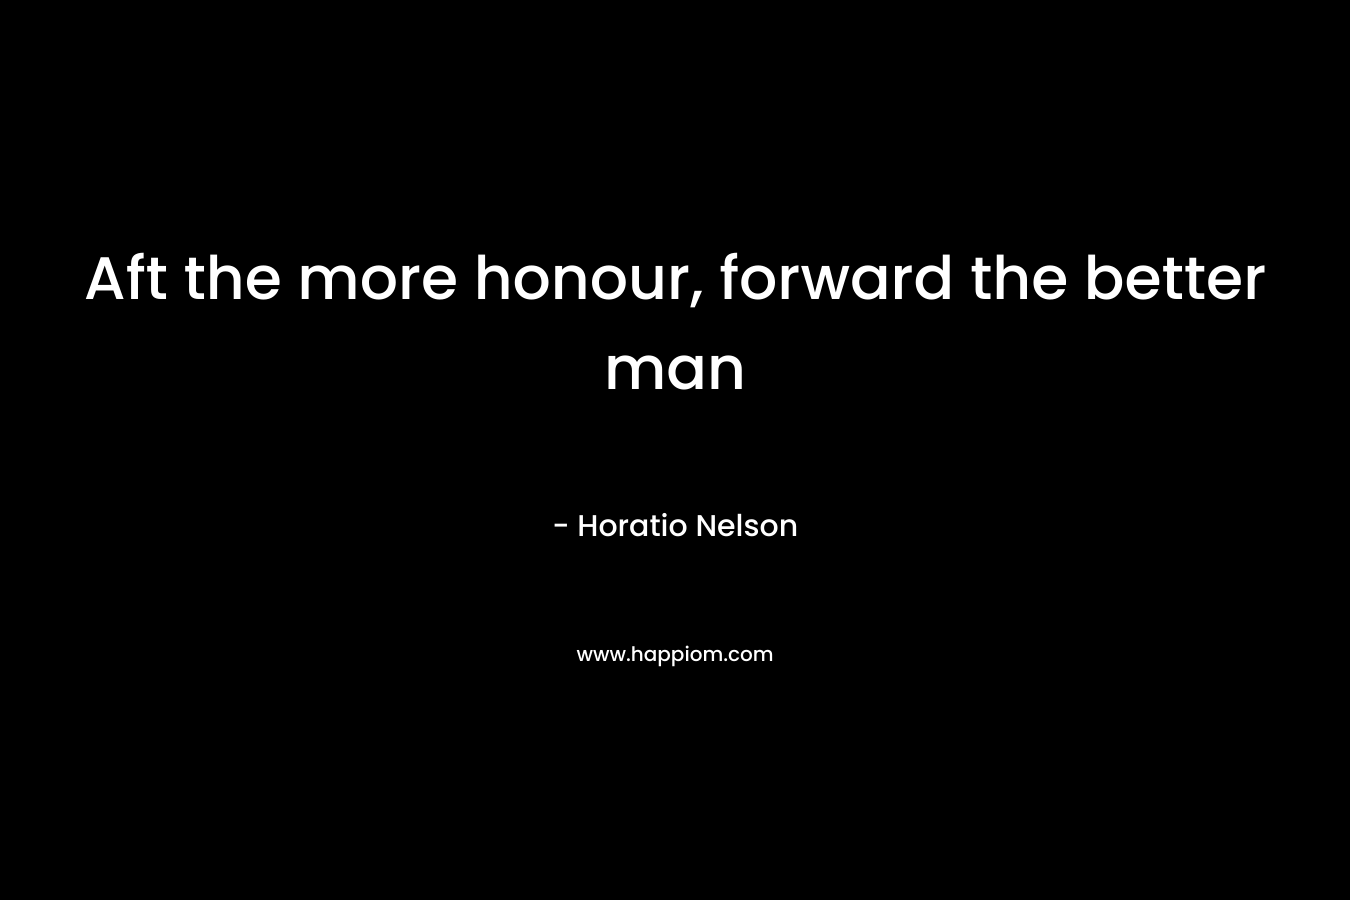 Aft the more honour, forward the better man